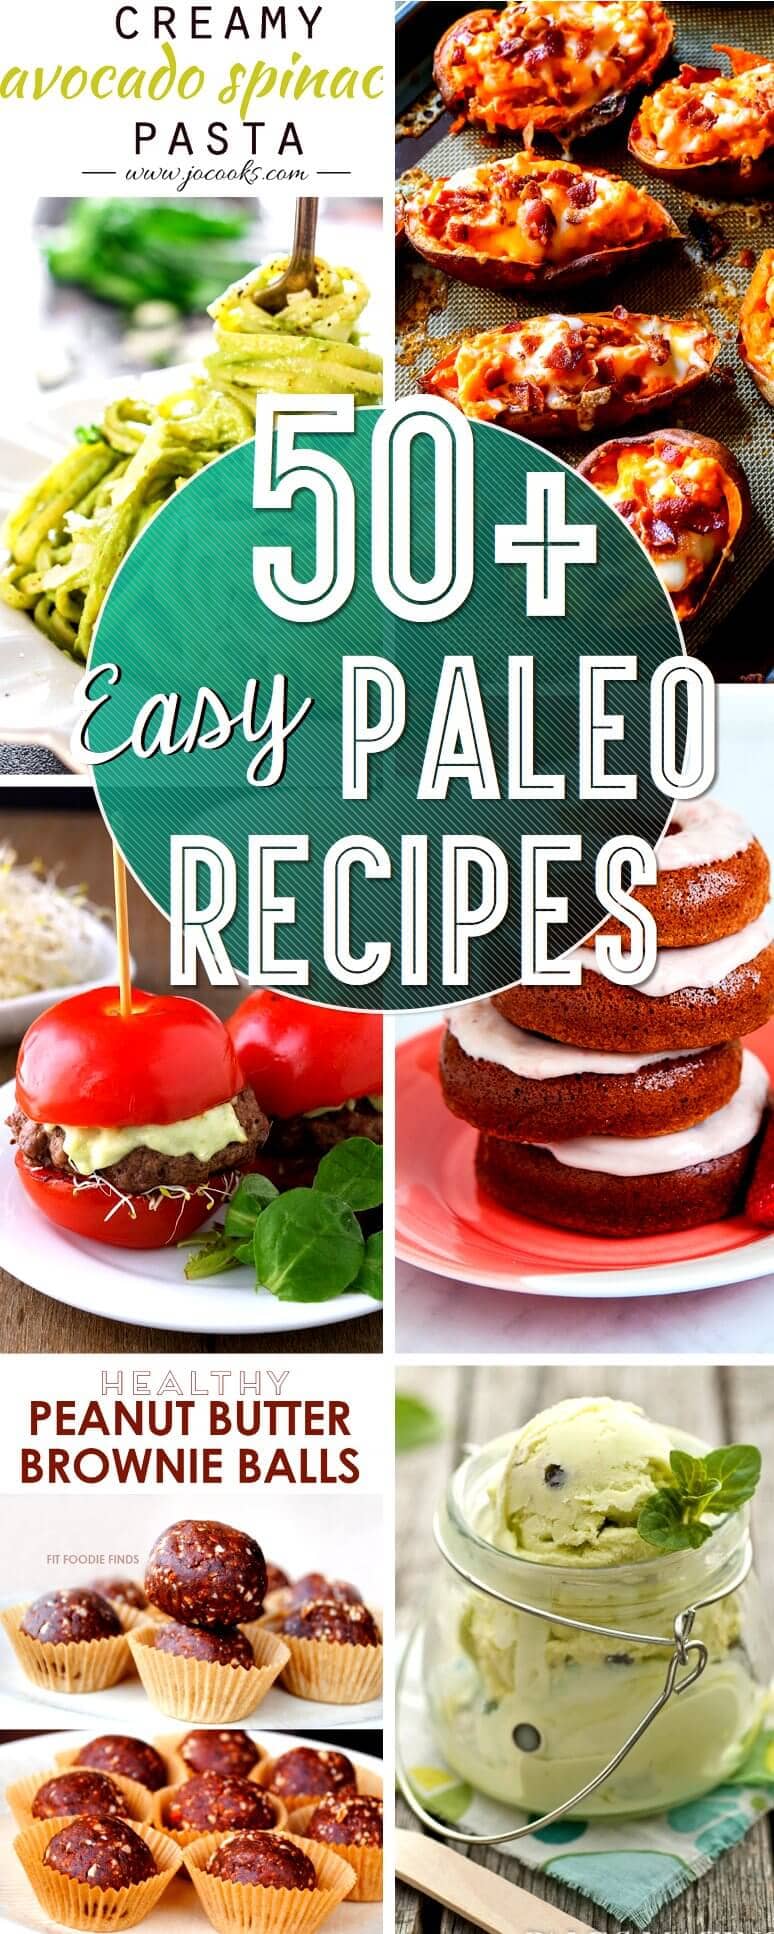 Quick and Easy Paleo Recipes that Will Make Your Mouth Water